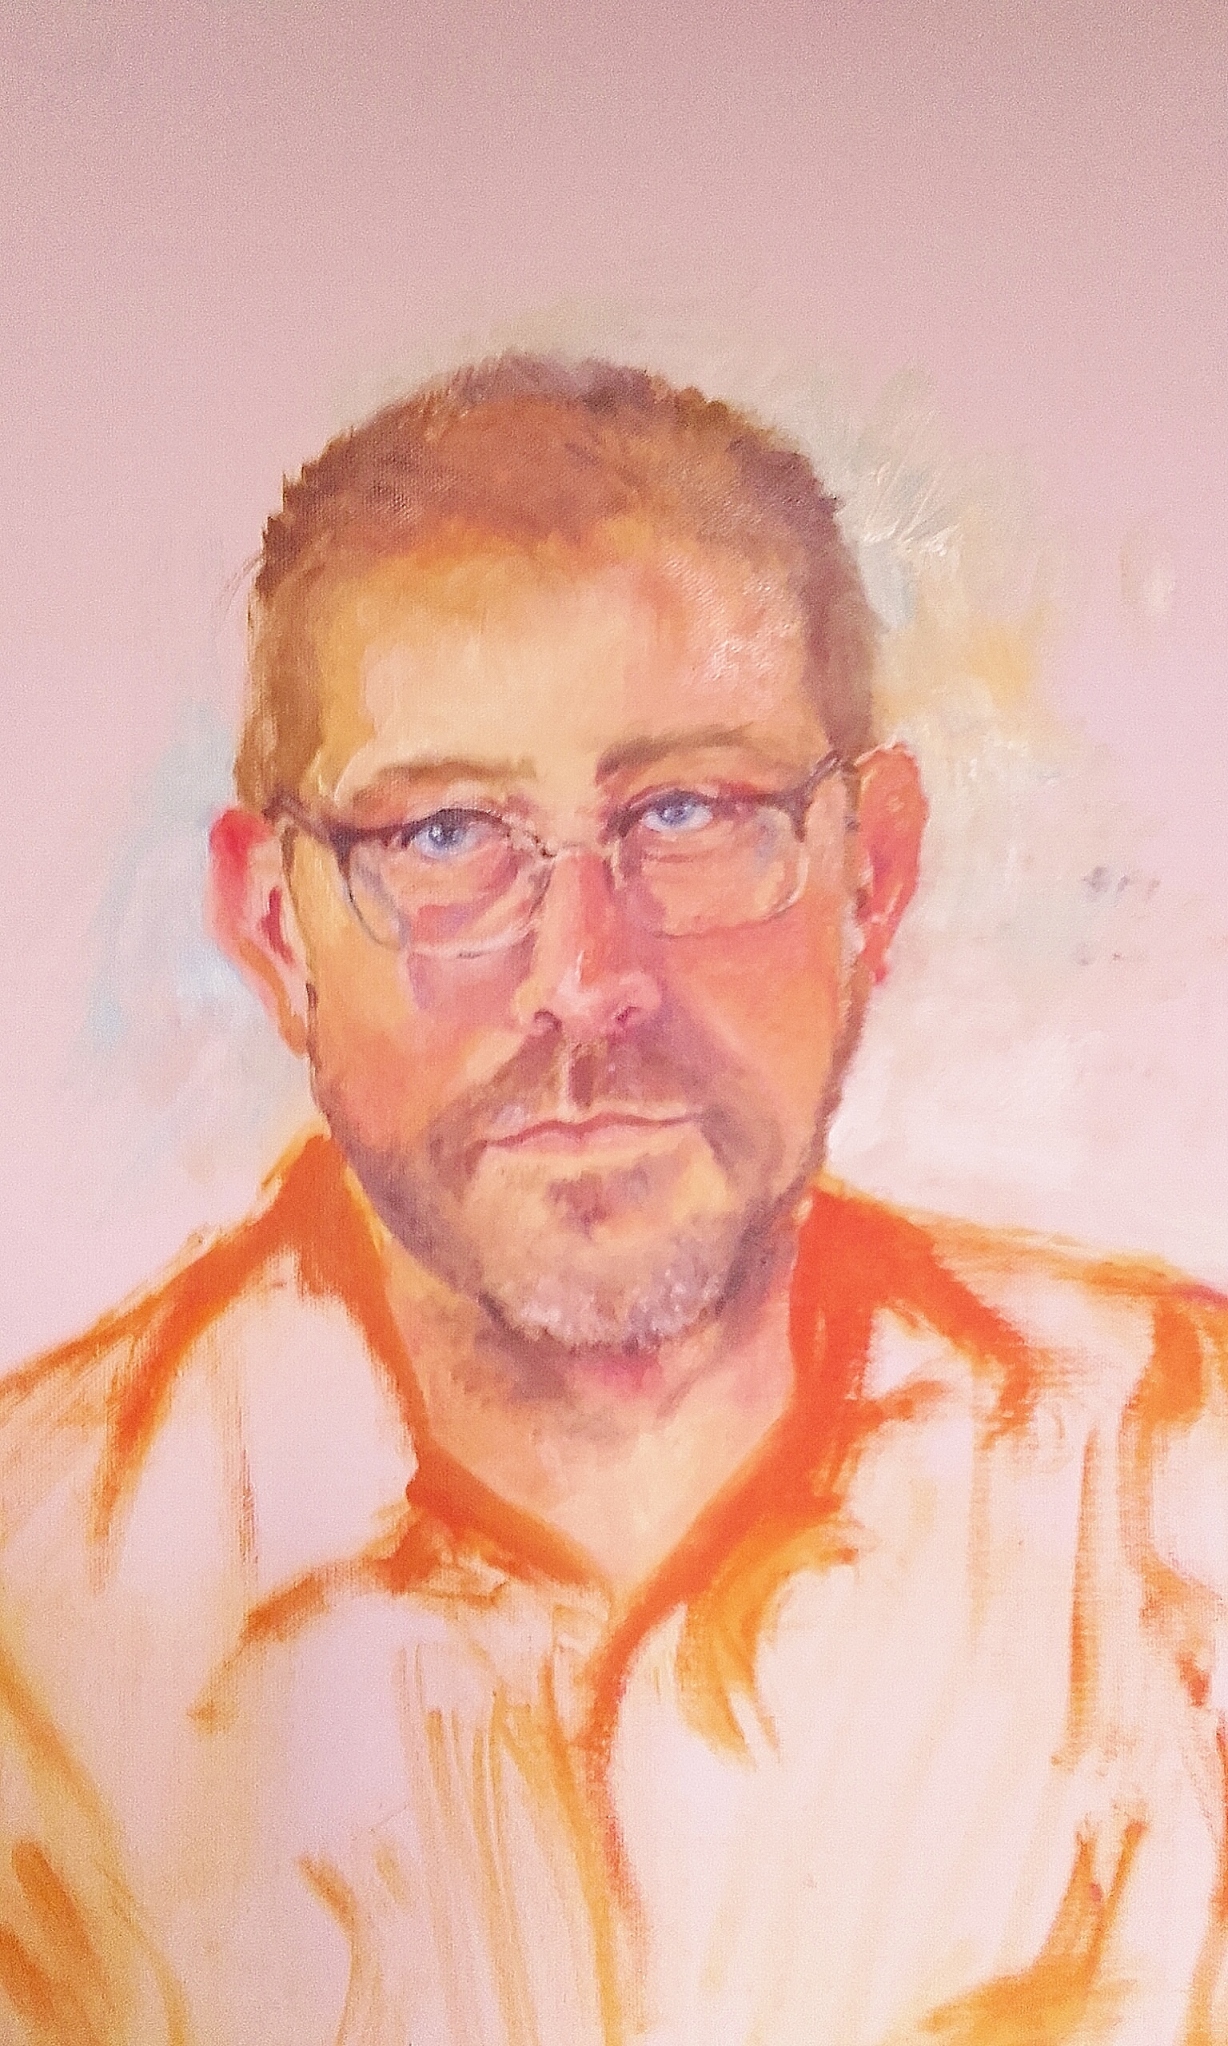 demo-portrait-of-dave-14-9-16-cropped